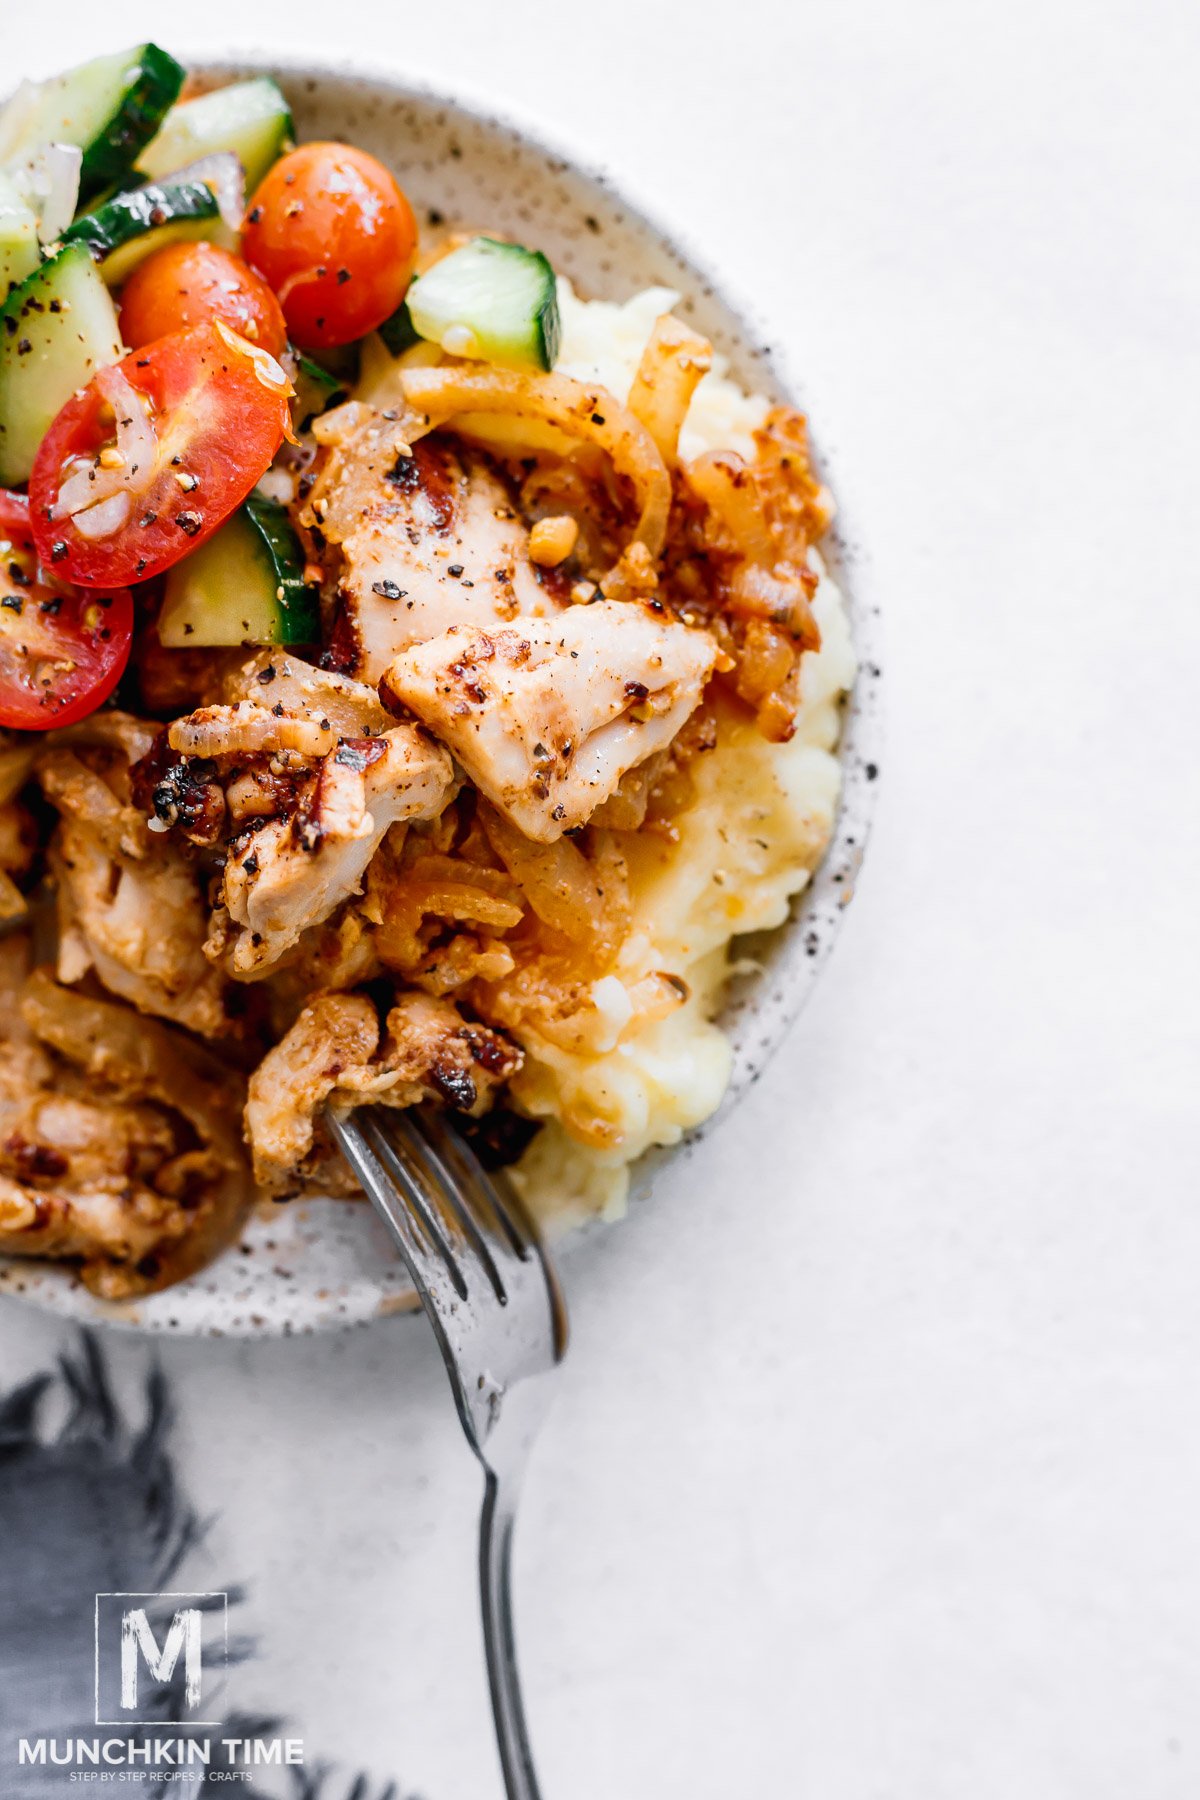 grilled Chicken Thighs with mashed potatoes